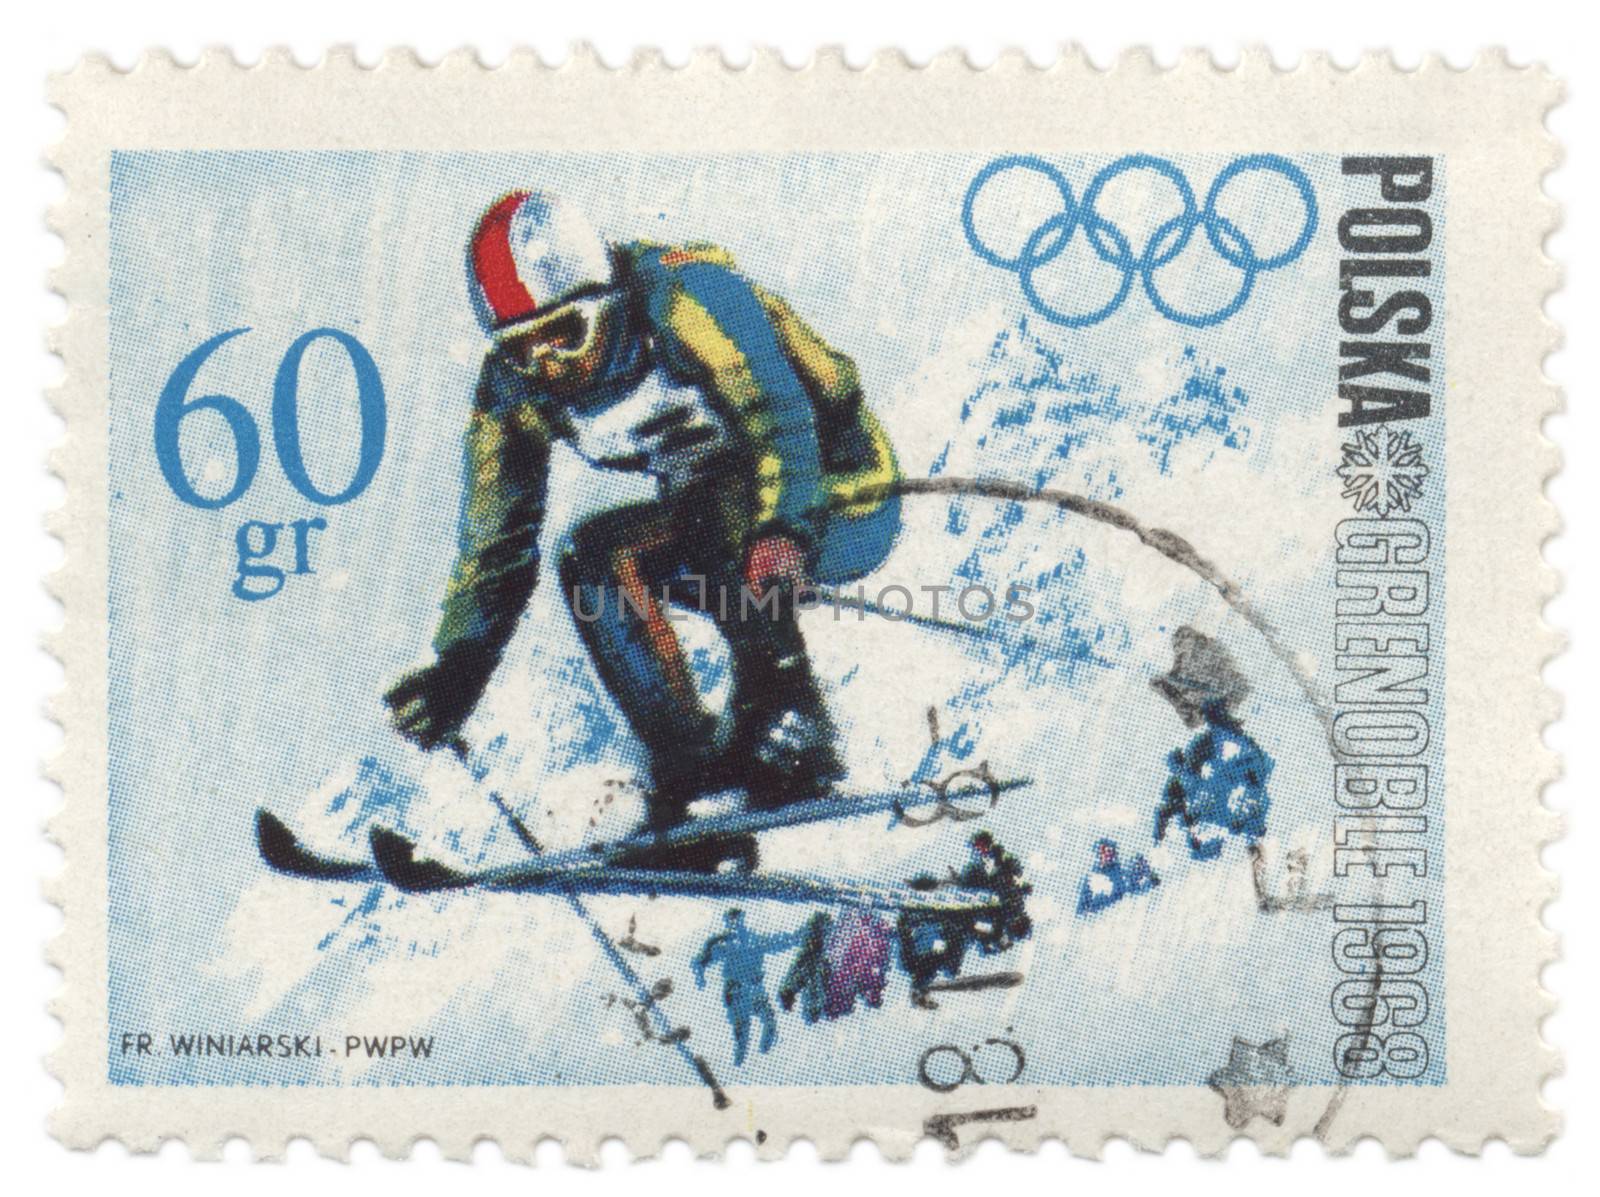 POLAND - CIRCA 1968: A post stamp printed in Poland shows ski jumper, dedicated to the Olympic Winter Games in Grenoble, series, circa 1968